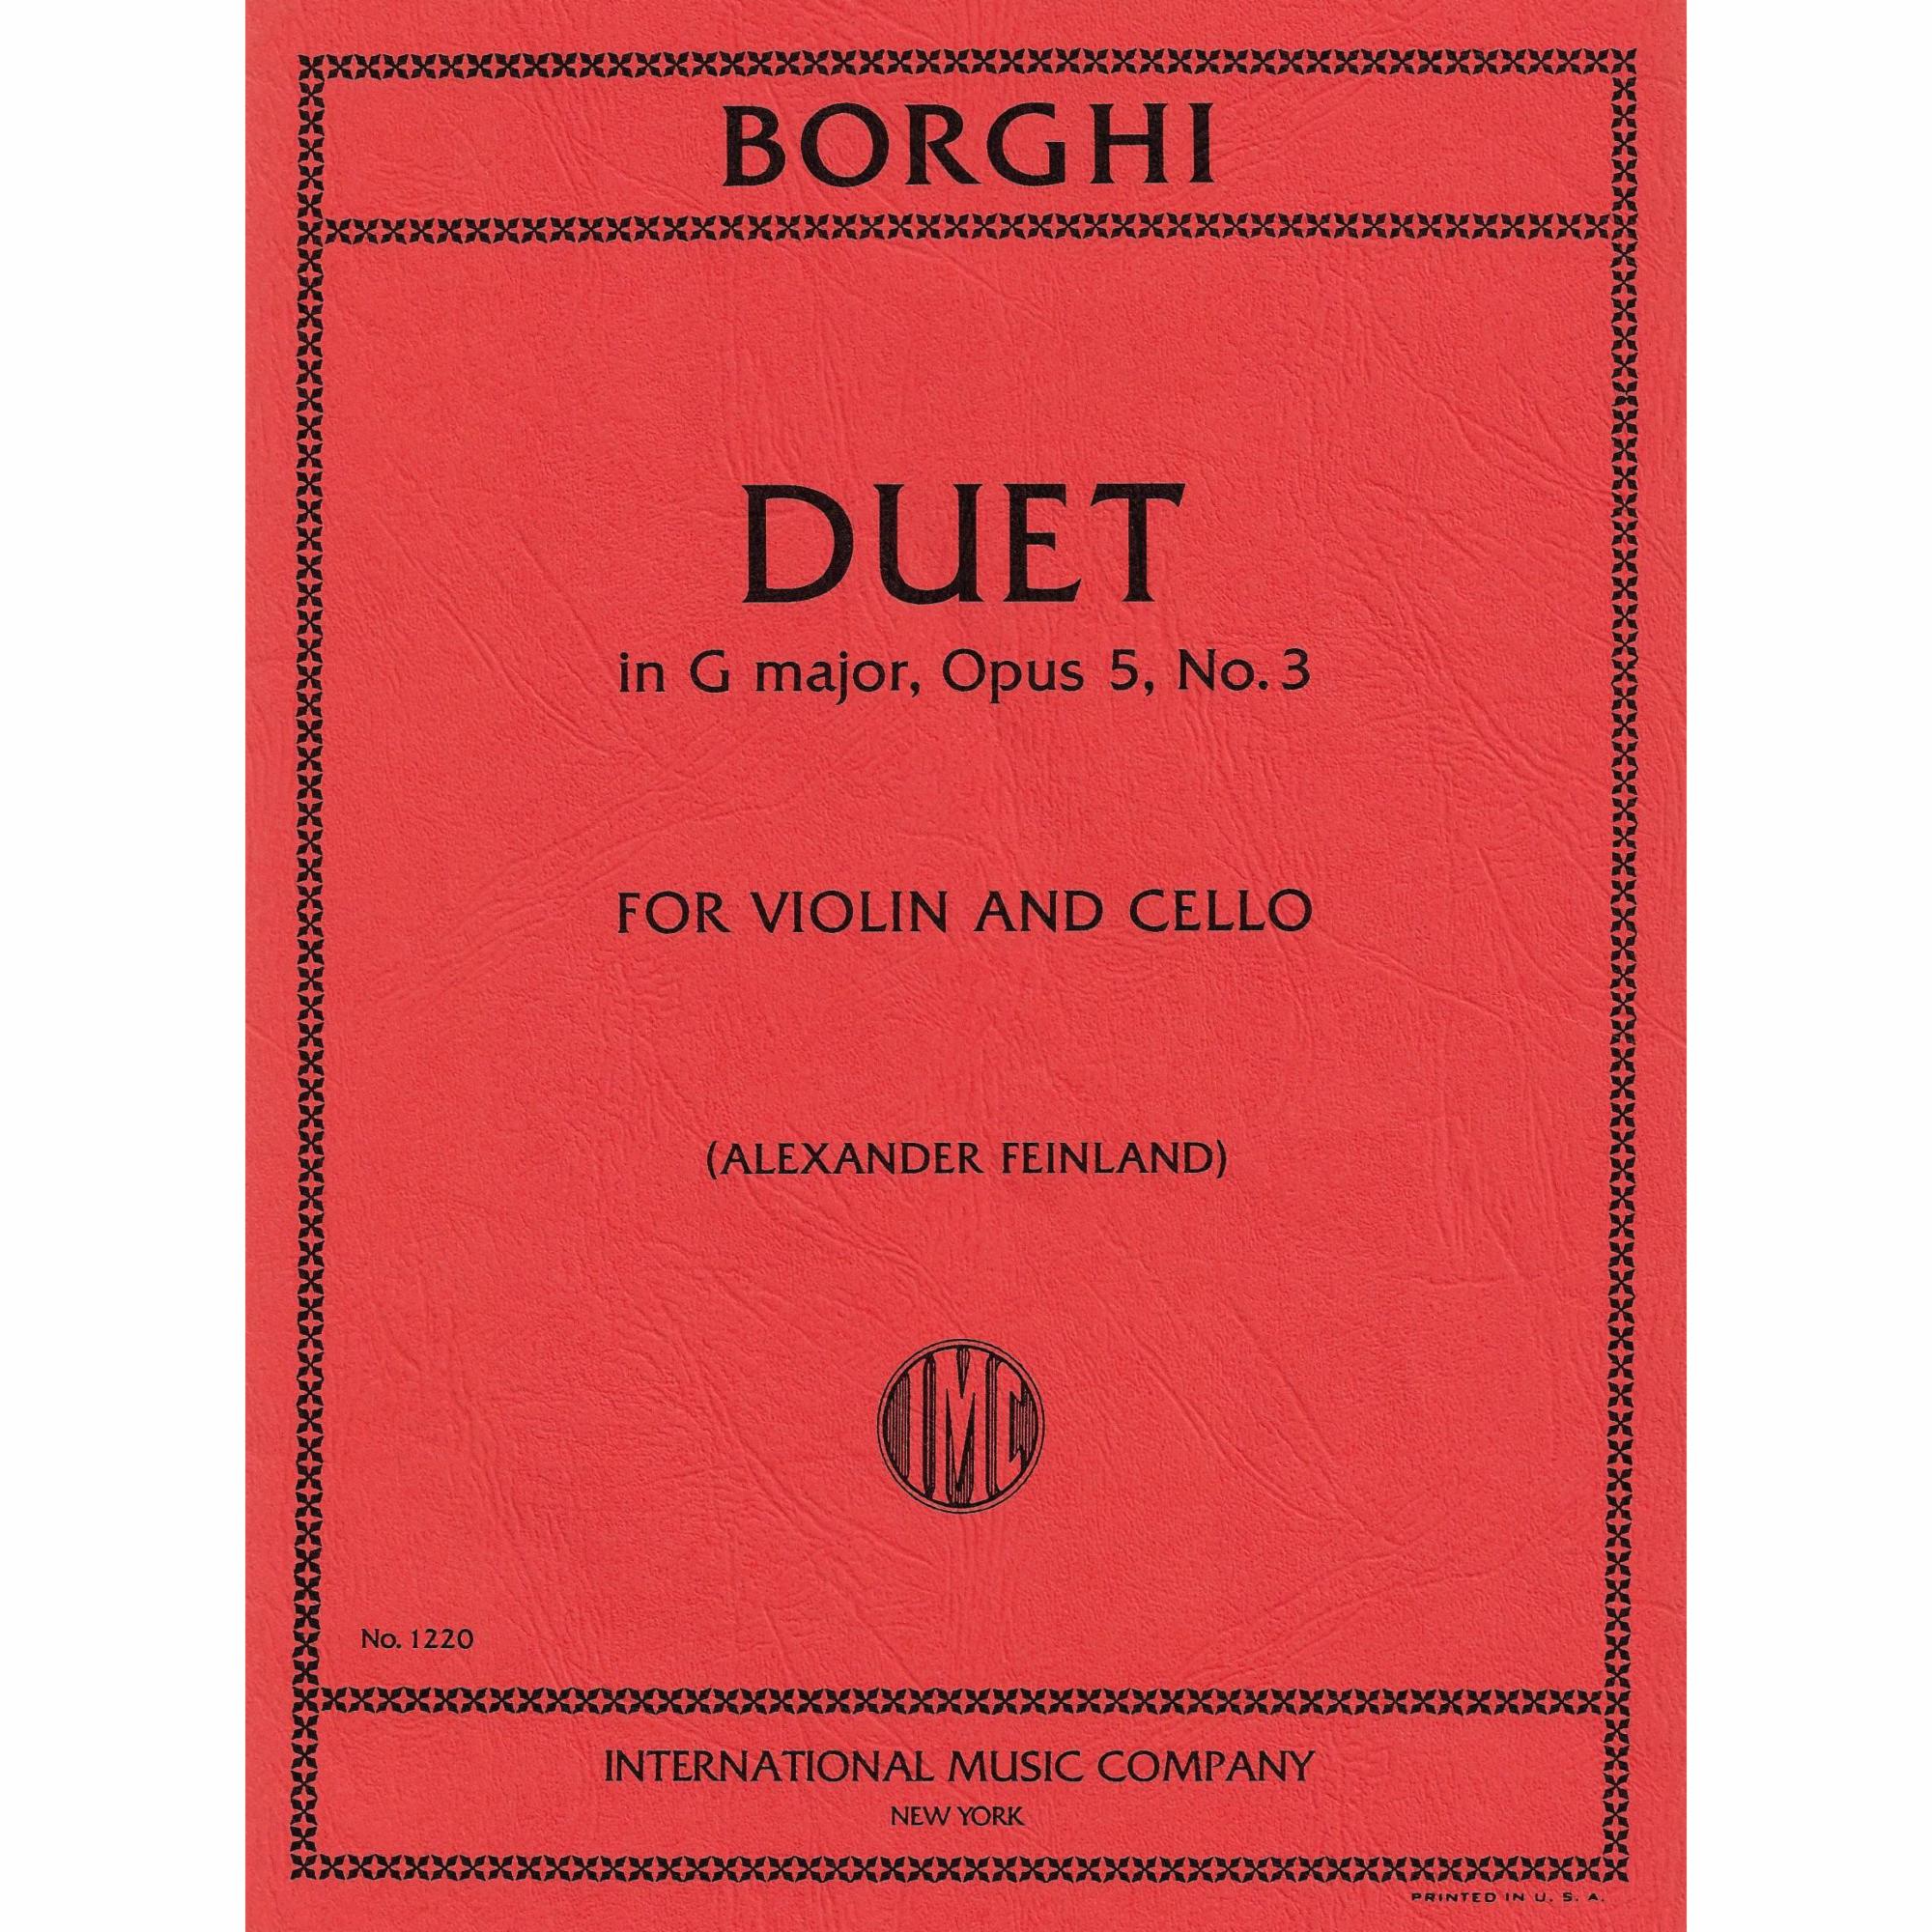 Borghi -- Duet in G Major, Op. 5, No. 3 for Violin and Cello